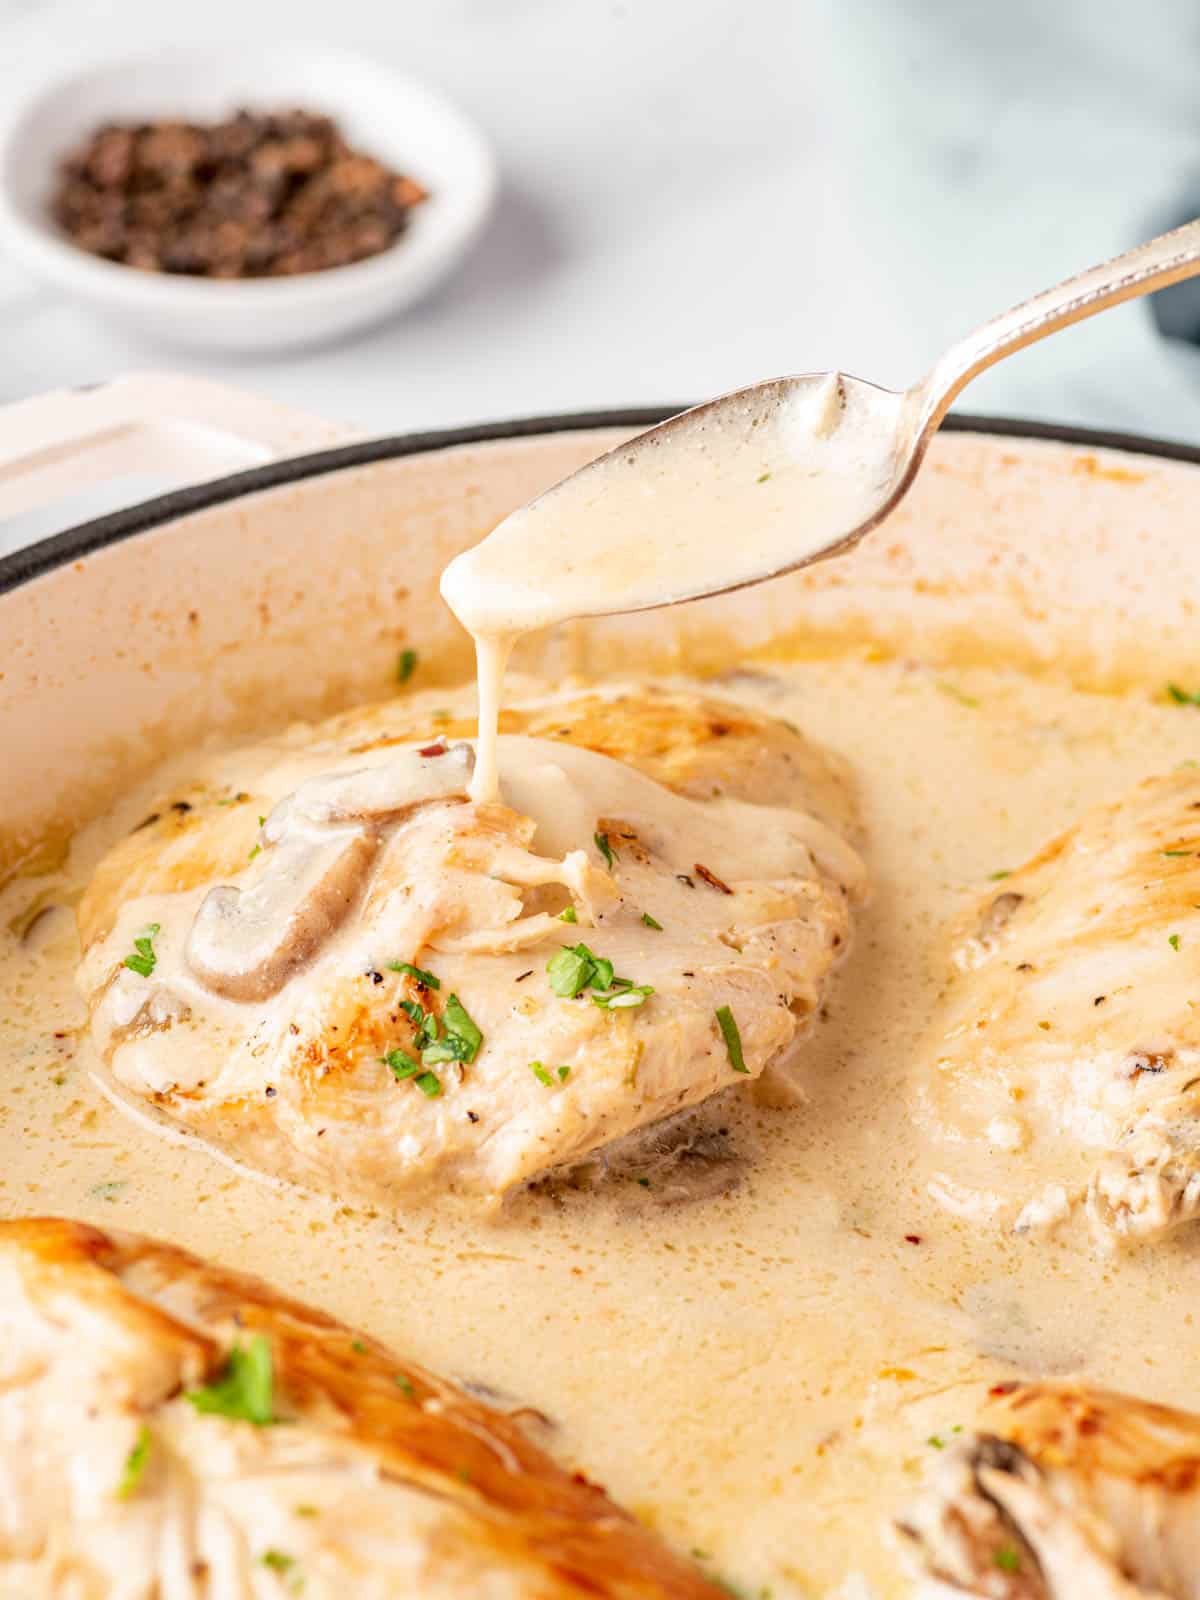 Creamy sauce is dripping off a spoon and onto stuffed chicken breast in a skillet.